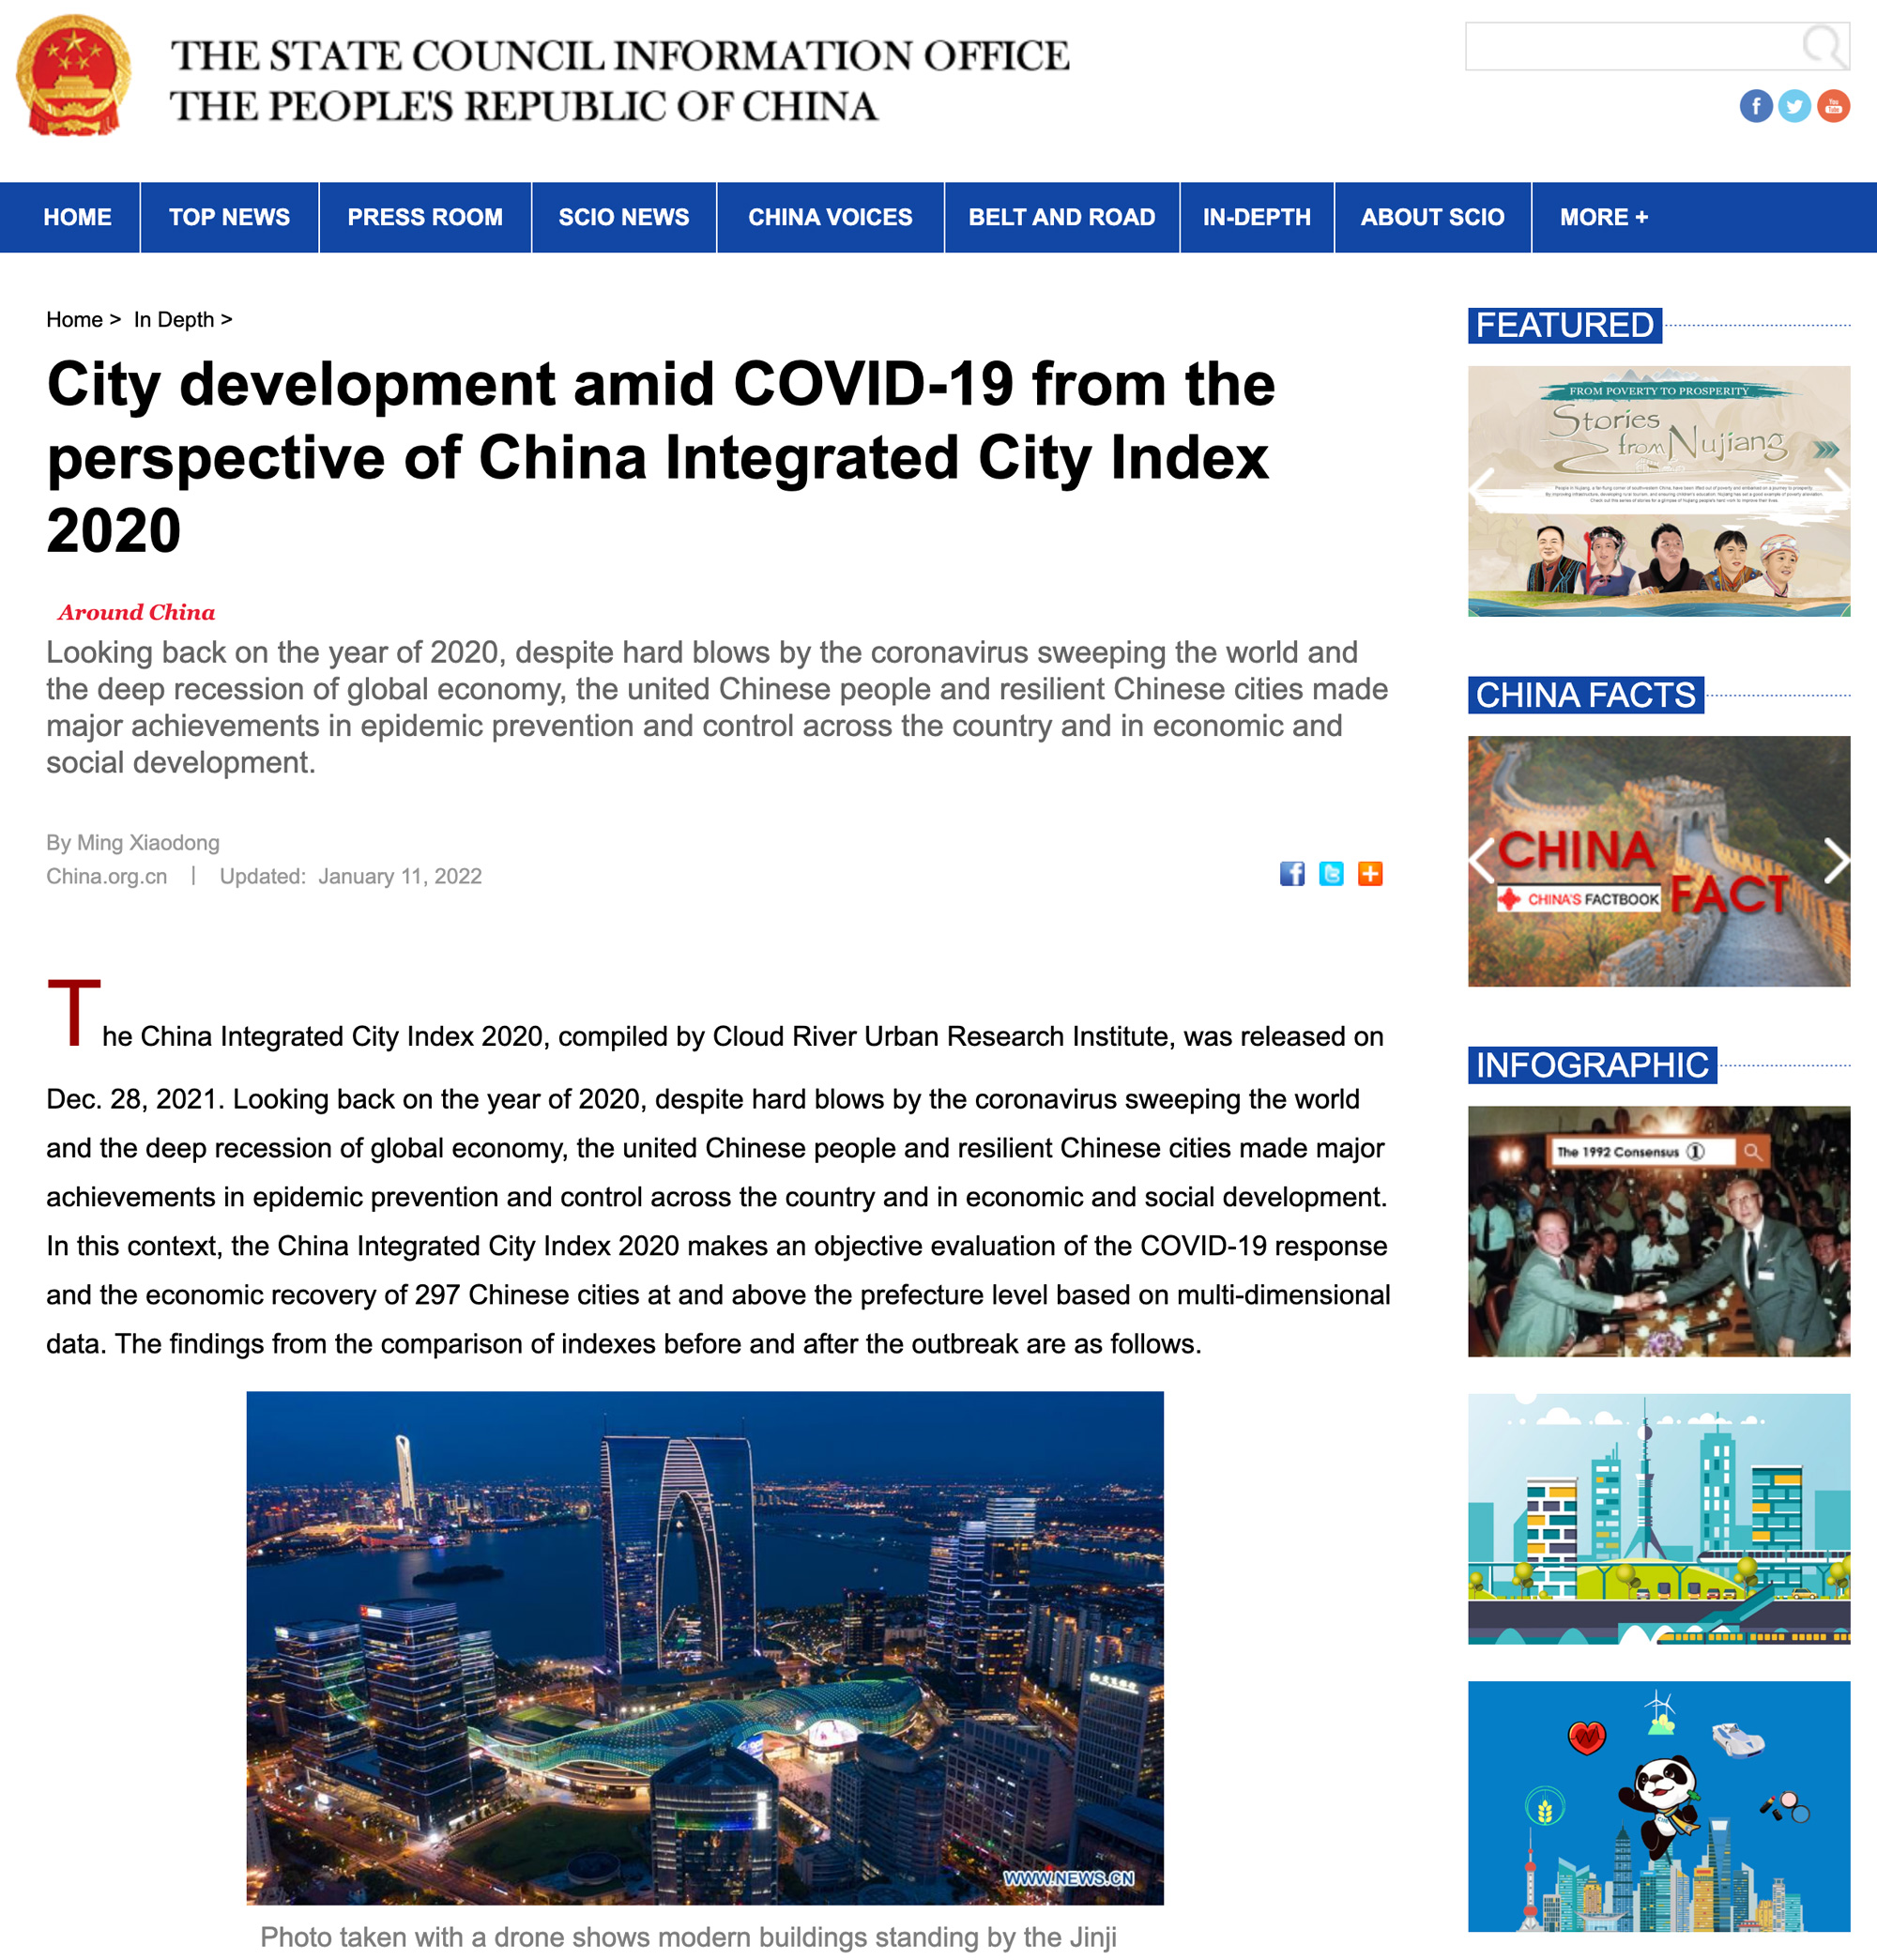 City development amid COVID-19 from the perspective of China Integrated City Index 2020